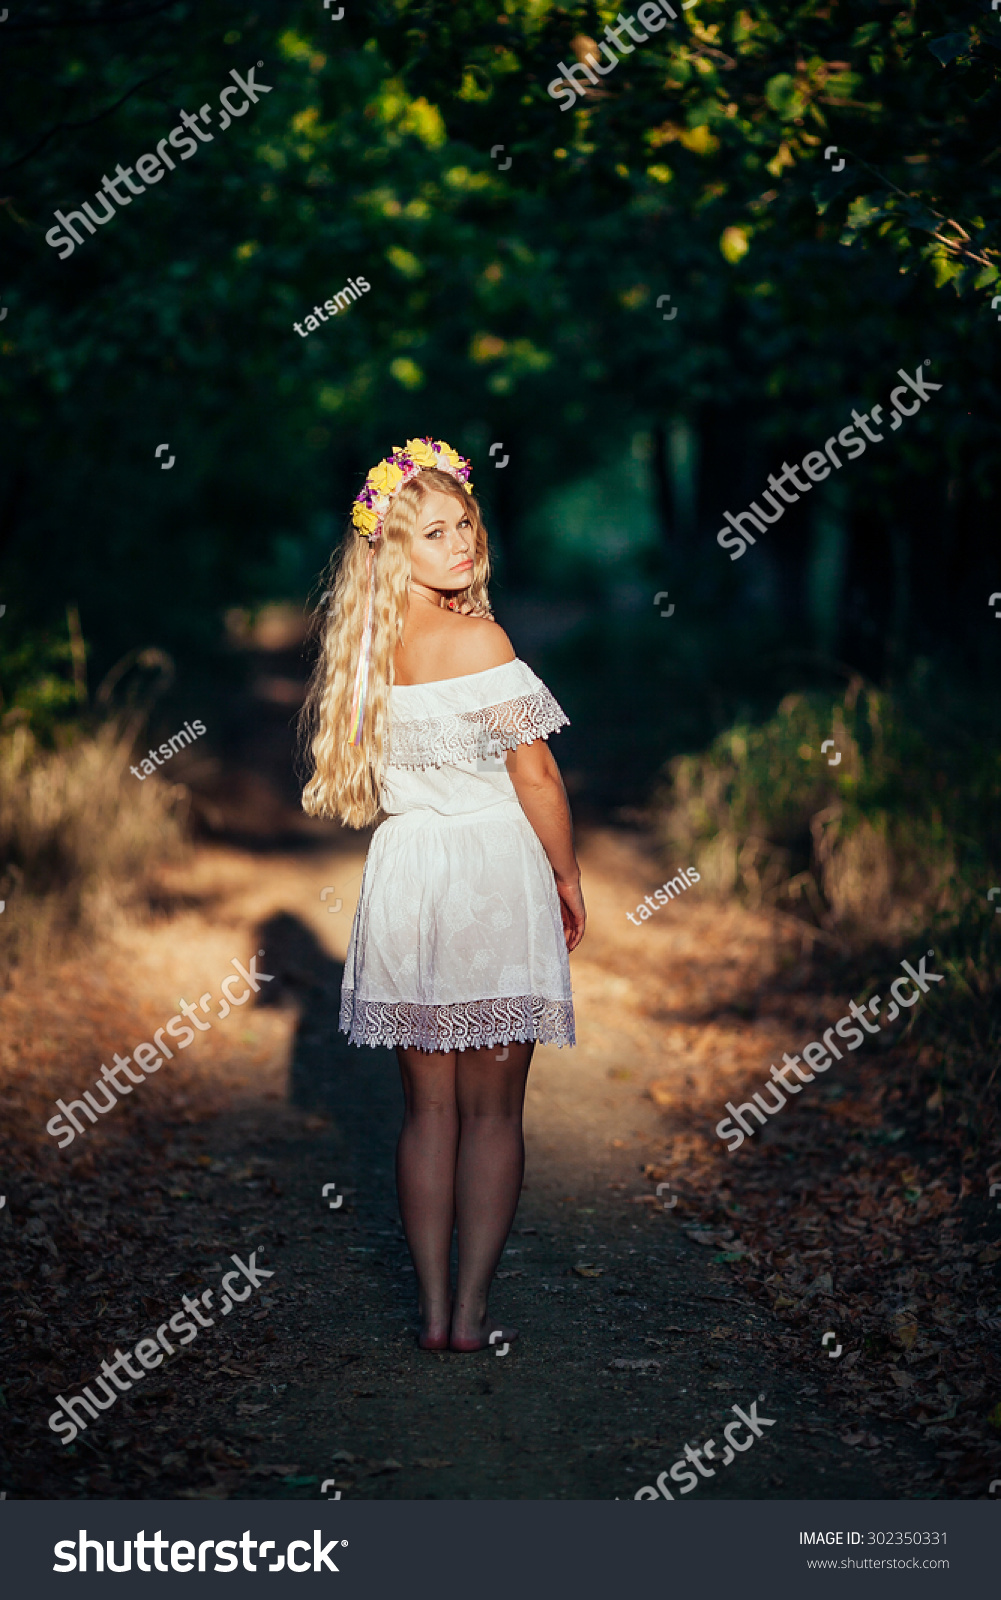 Blonde babe wearing a skirt and has no idea about the camera